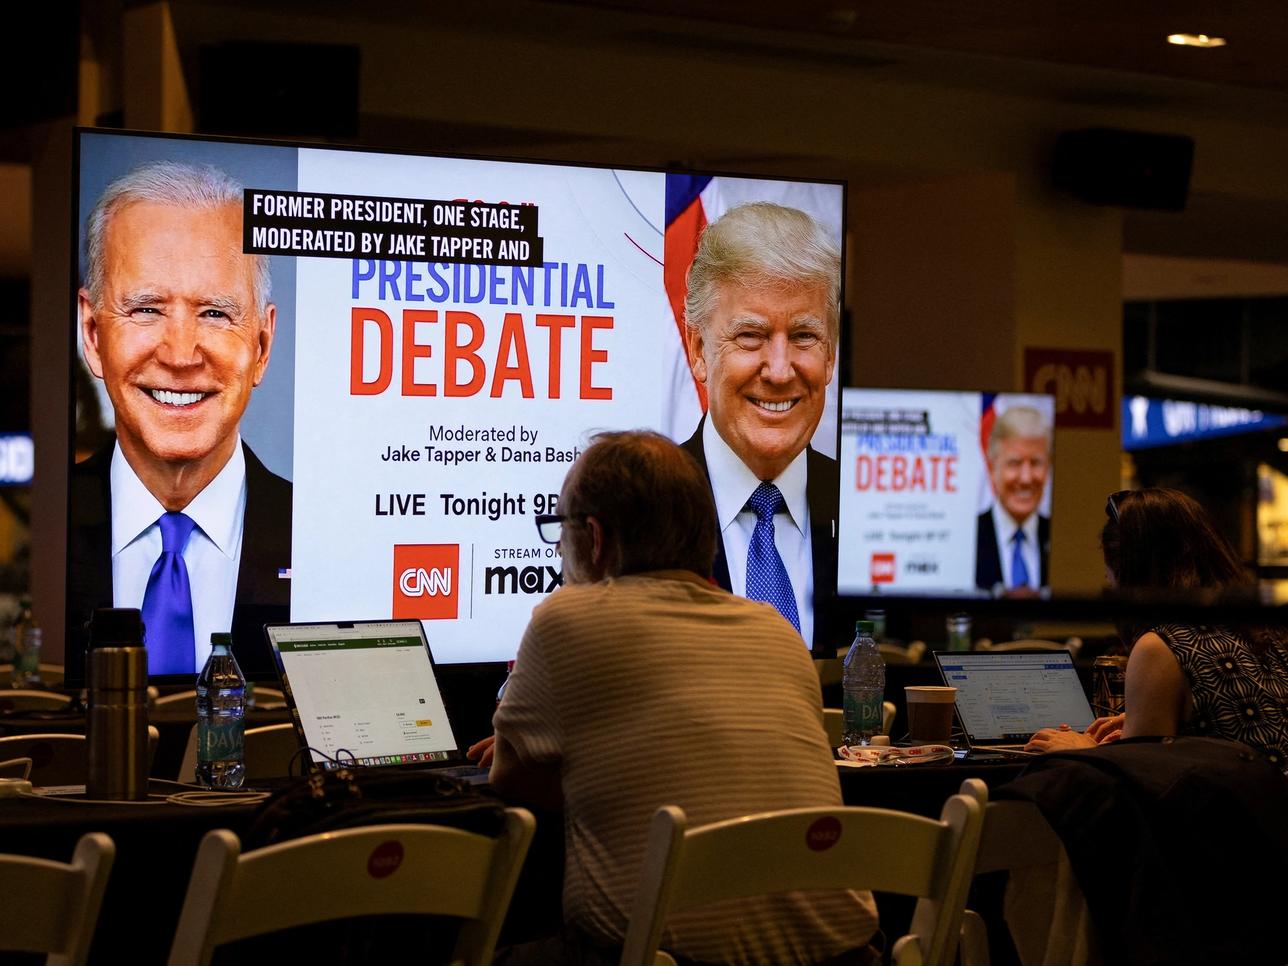 FILE PHOTO: Media crews work at the press room in the McCamish Pavilion on the Georgia Institute of Technology campus ahead of the first 2024 presidential debate between Democratic presidential candidate U.S. President Joe Biden and Republican presidential candidate former U.S. President Donald Trump in Atlanta, Georgia, U.S., June 27, 2024. REUTERS/Marco Bello/File Photo